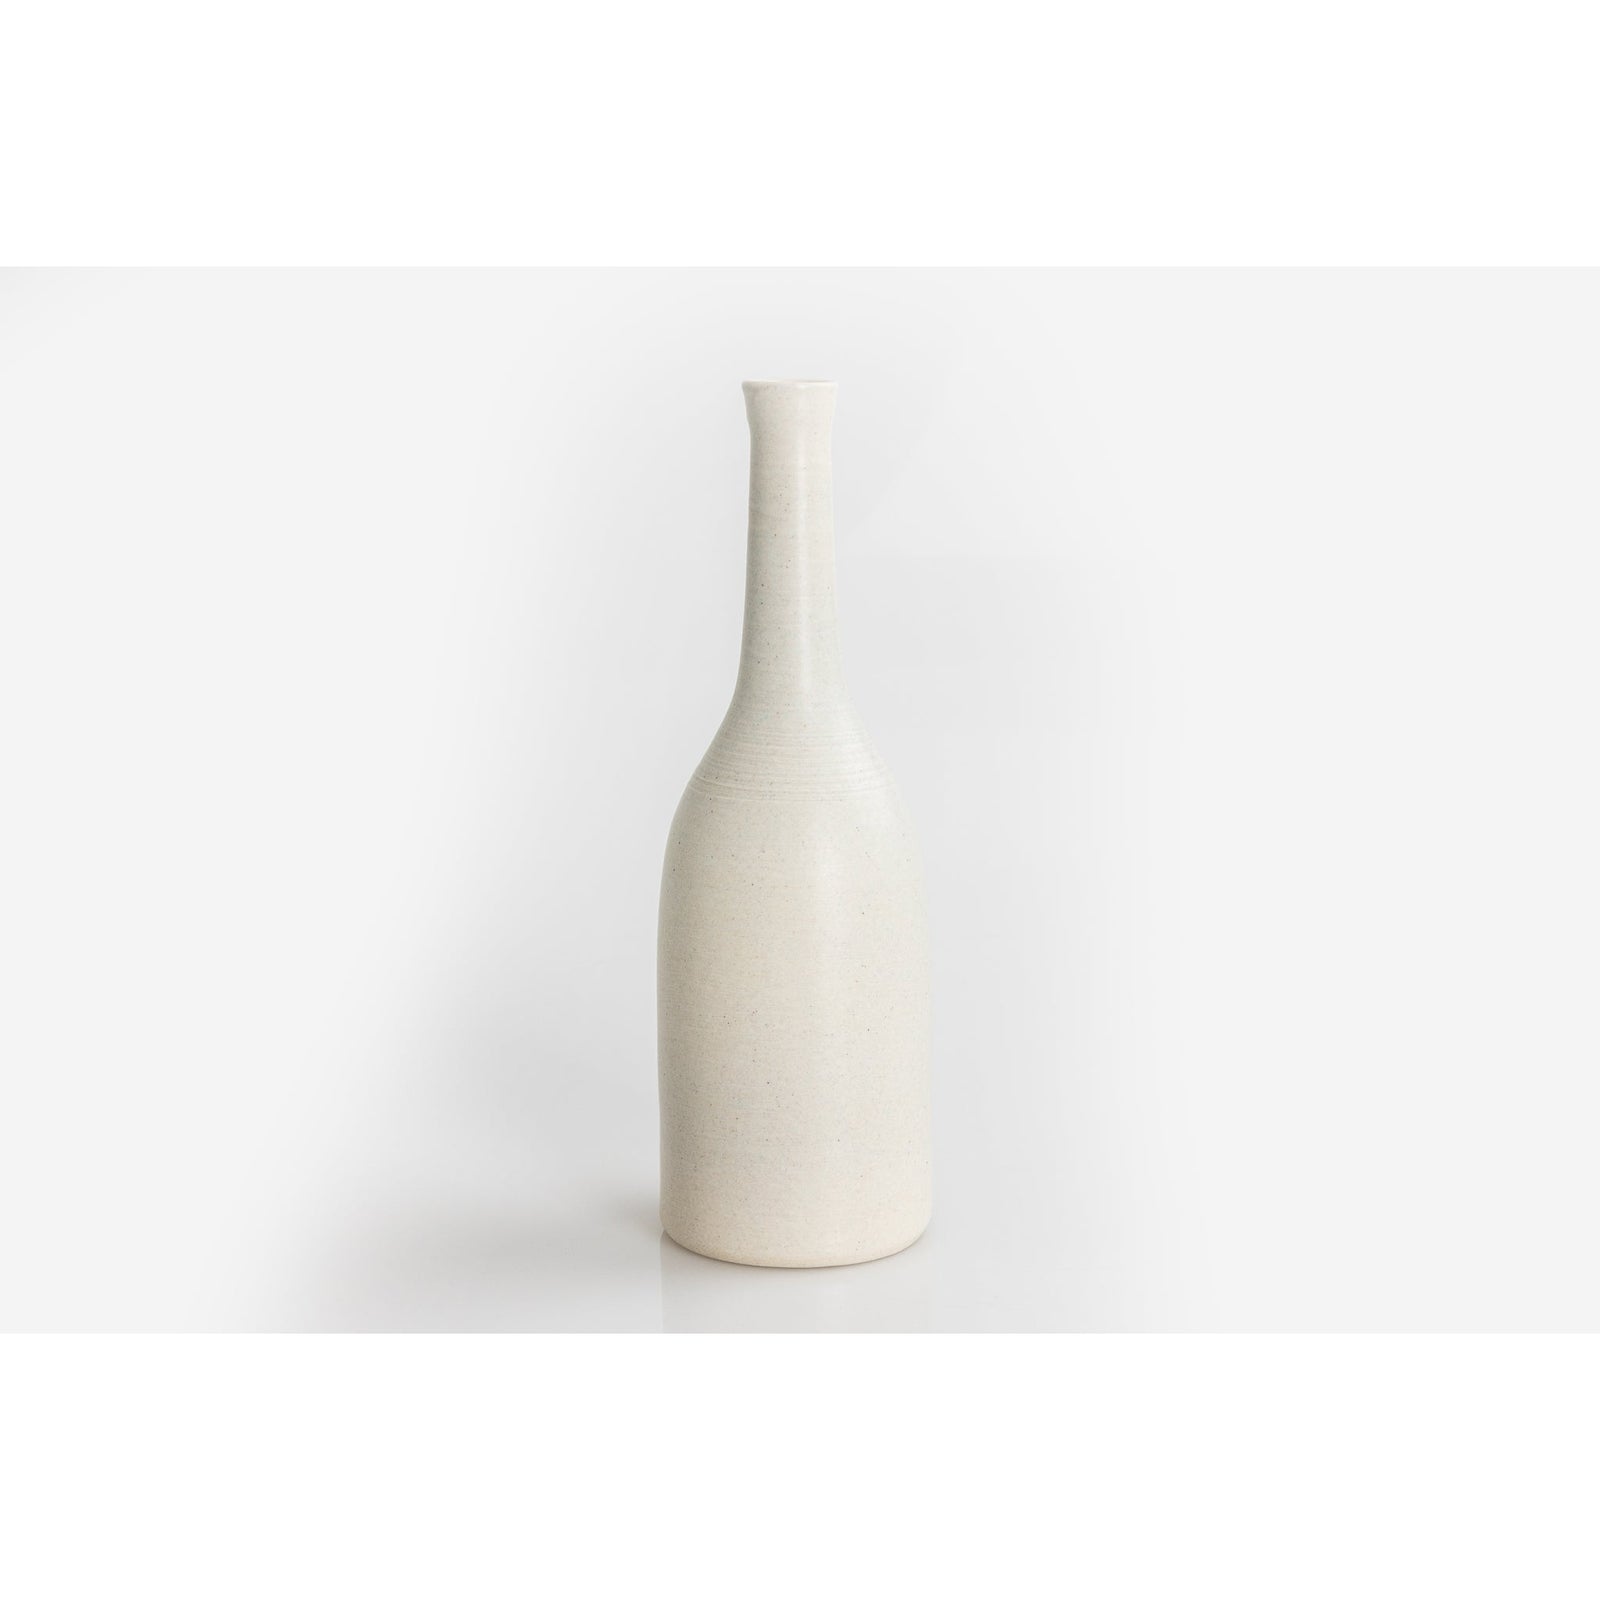 'LB150 Palest Grey Bottle' by Lucy Burley ceramics, available at Padstow Gallery, Cornwall